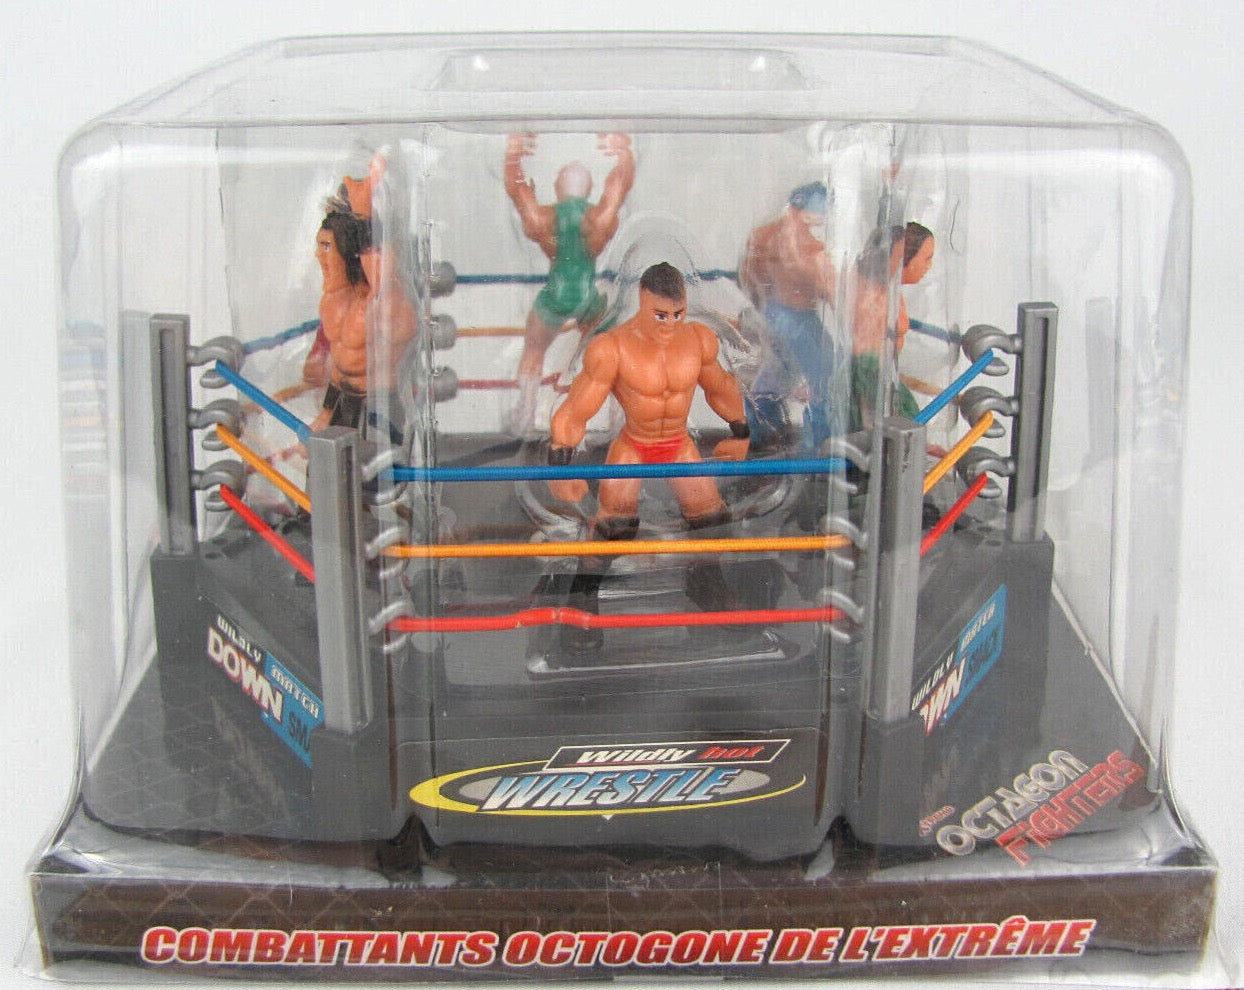 Extreme Octagon Fighters Bootleg/Knockoff Mini Figures & Ring